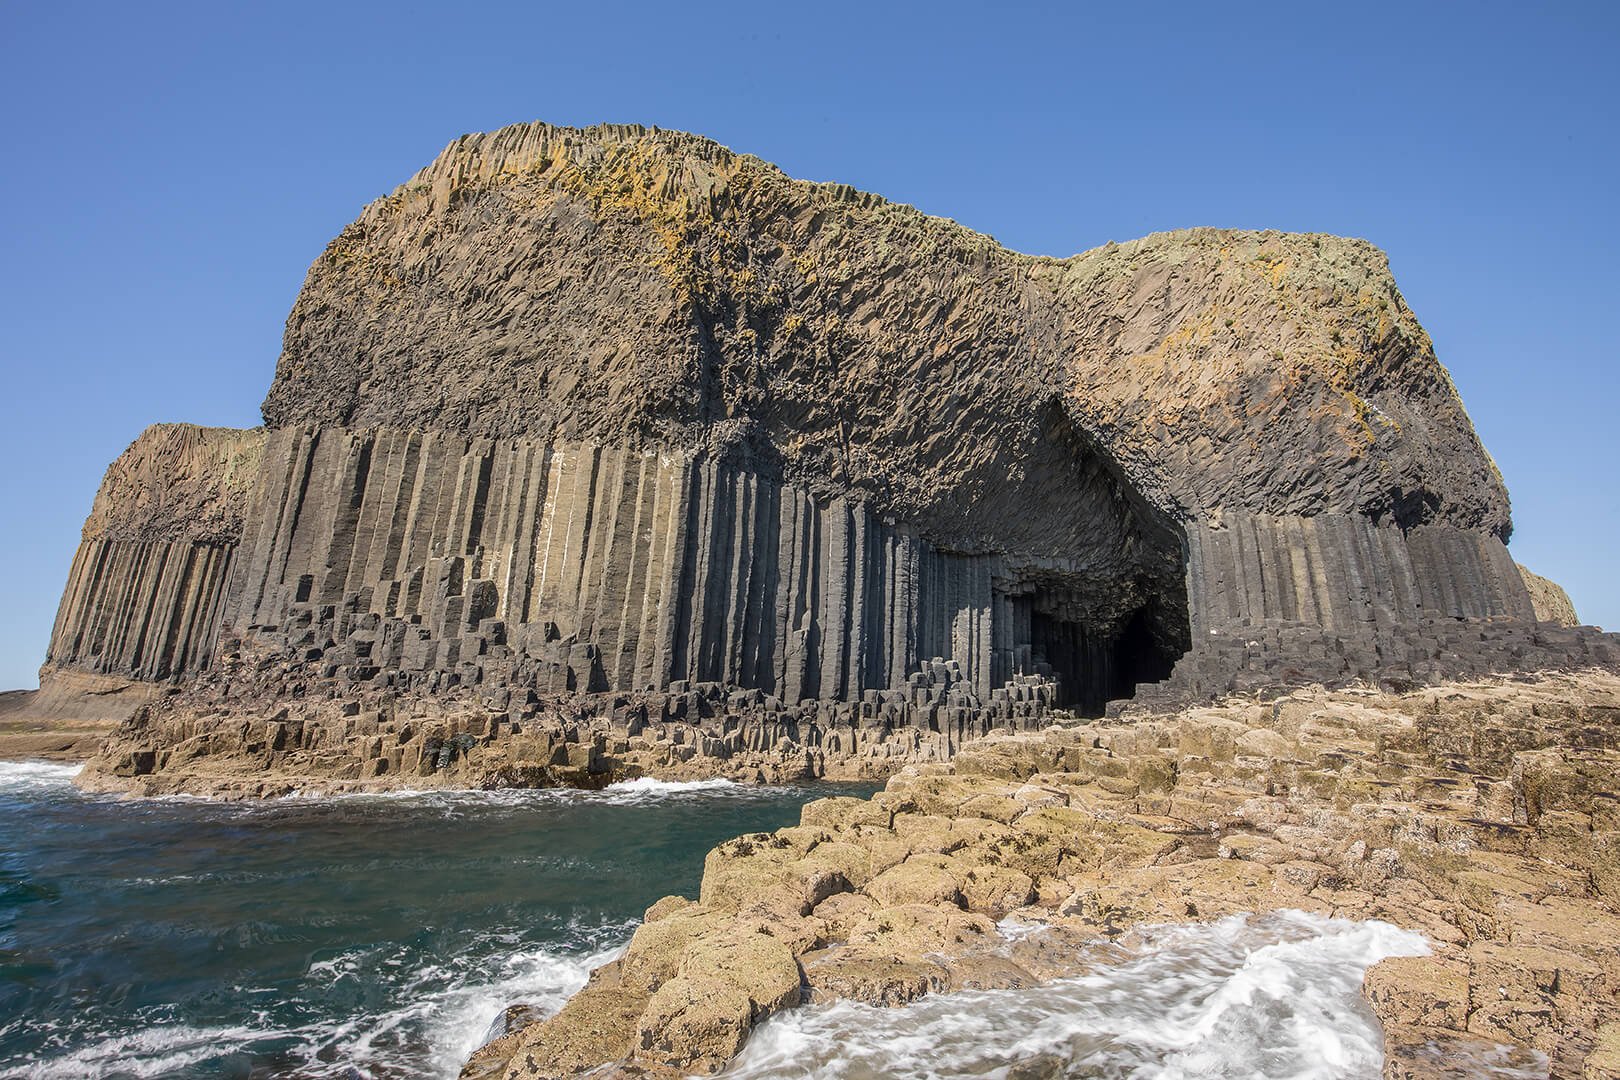 Staffa and Fingal's Cave photographed on Natural World Photography Otters and Eagles wildlife photography tour to Mull